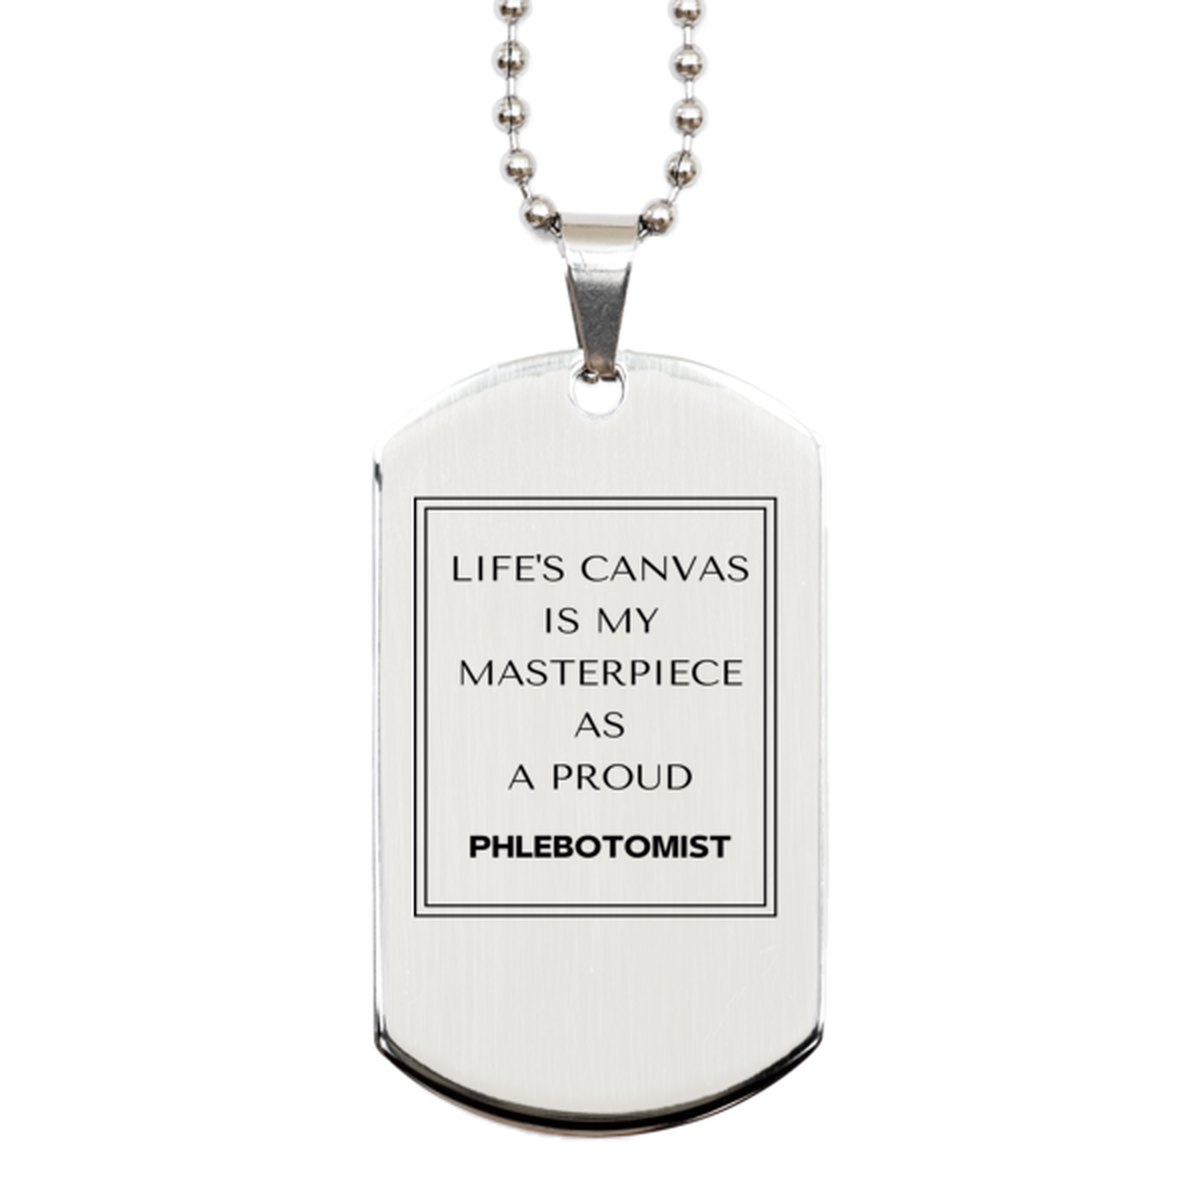 Proud Phlebotomist Gifts, Life's canvas is my masterpiece, Epic Birthday Christmas Unique Silver Dog Tag For Phlebotomist, Coworkers, Men, Women, Friends